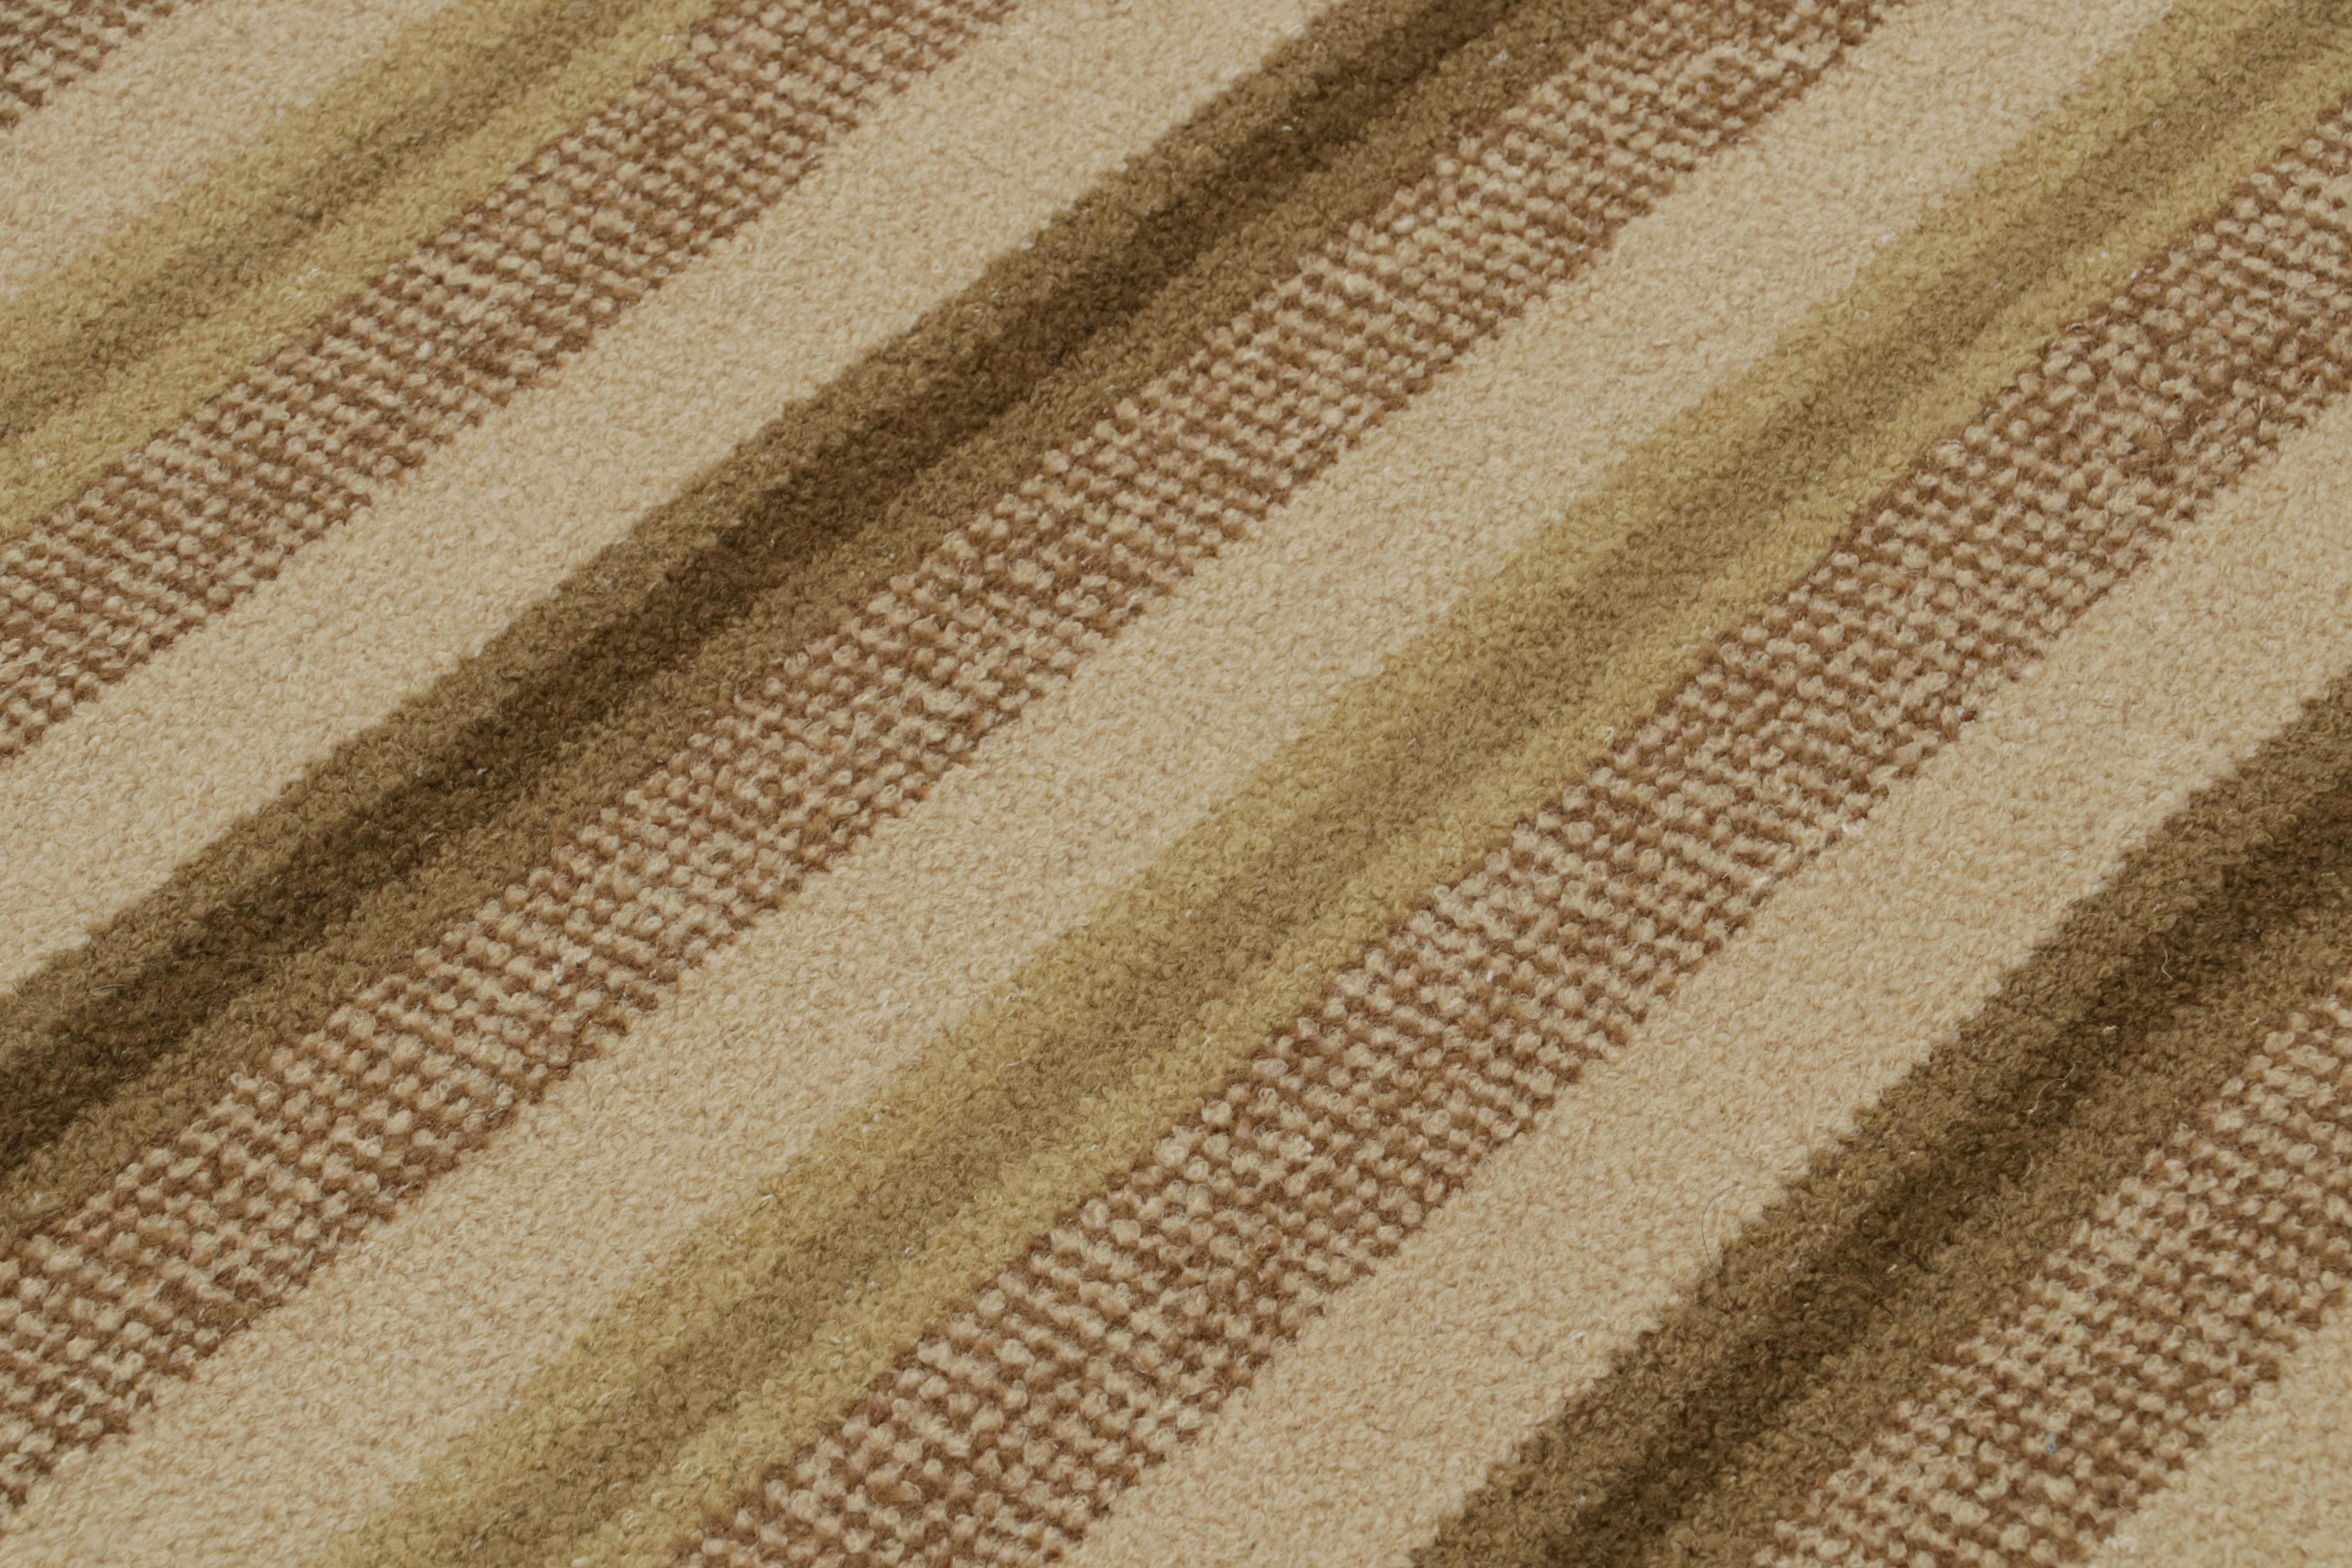 Indian Rug & Kilim’s Scandinavian Style Rug with Chartreuse and Beige-Brown Stripes For Sale